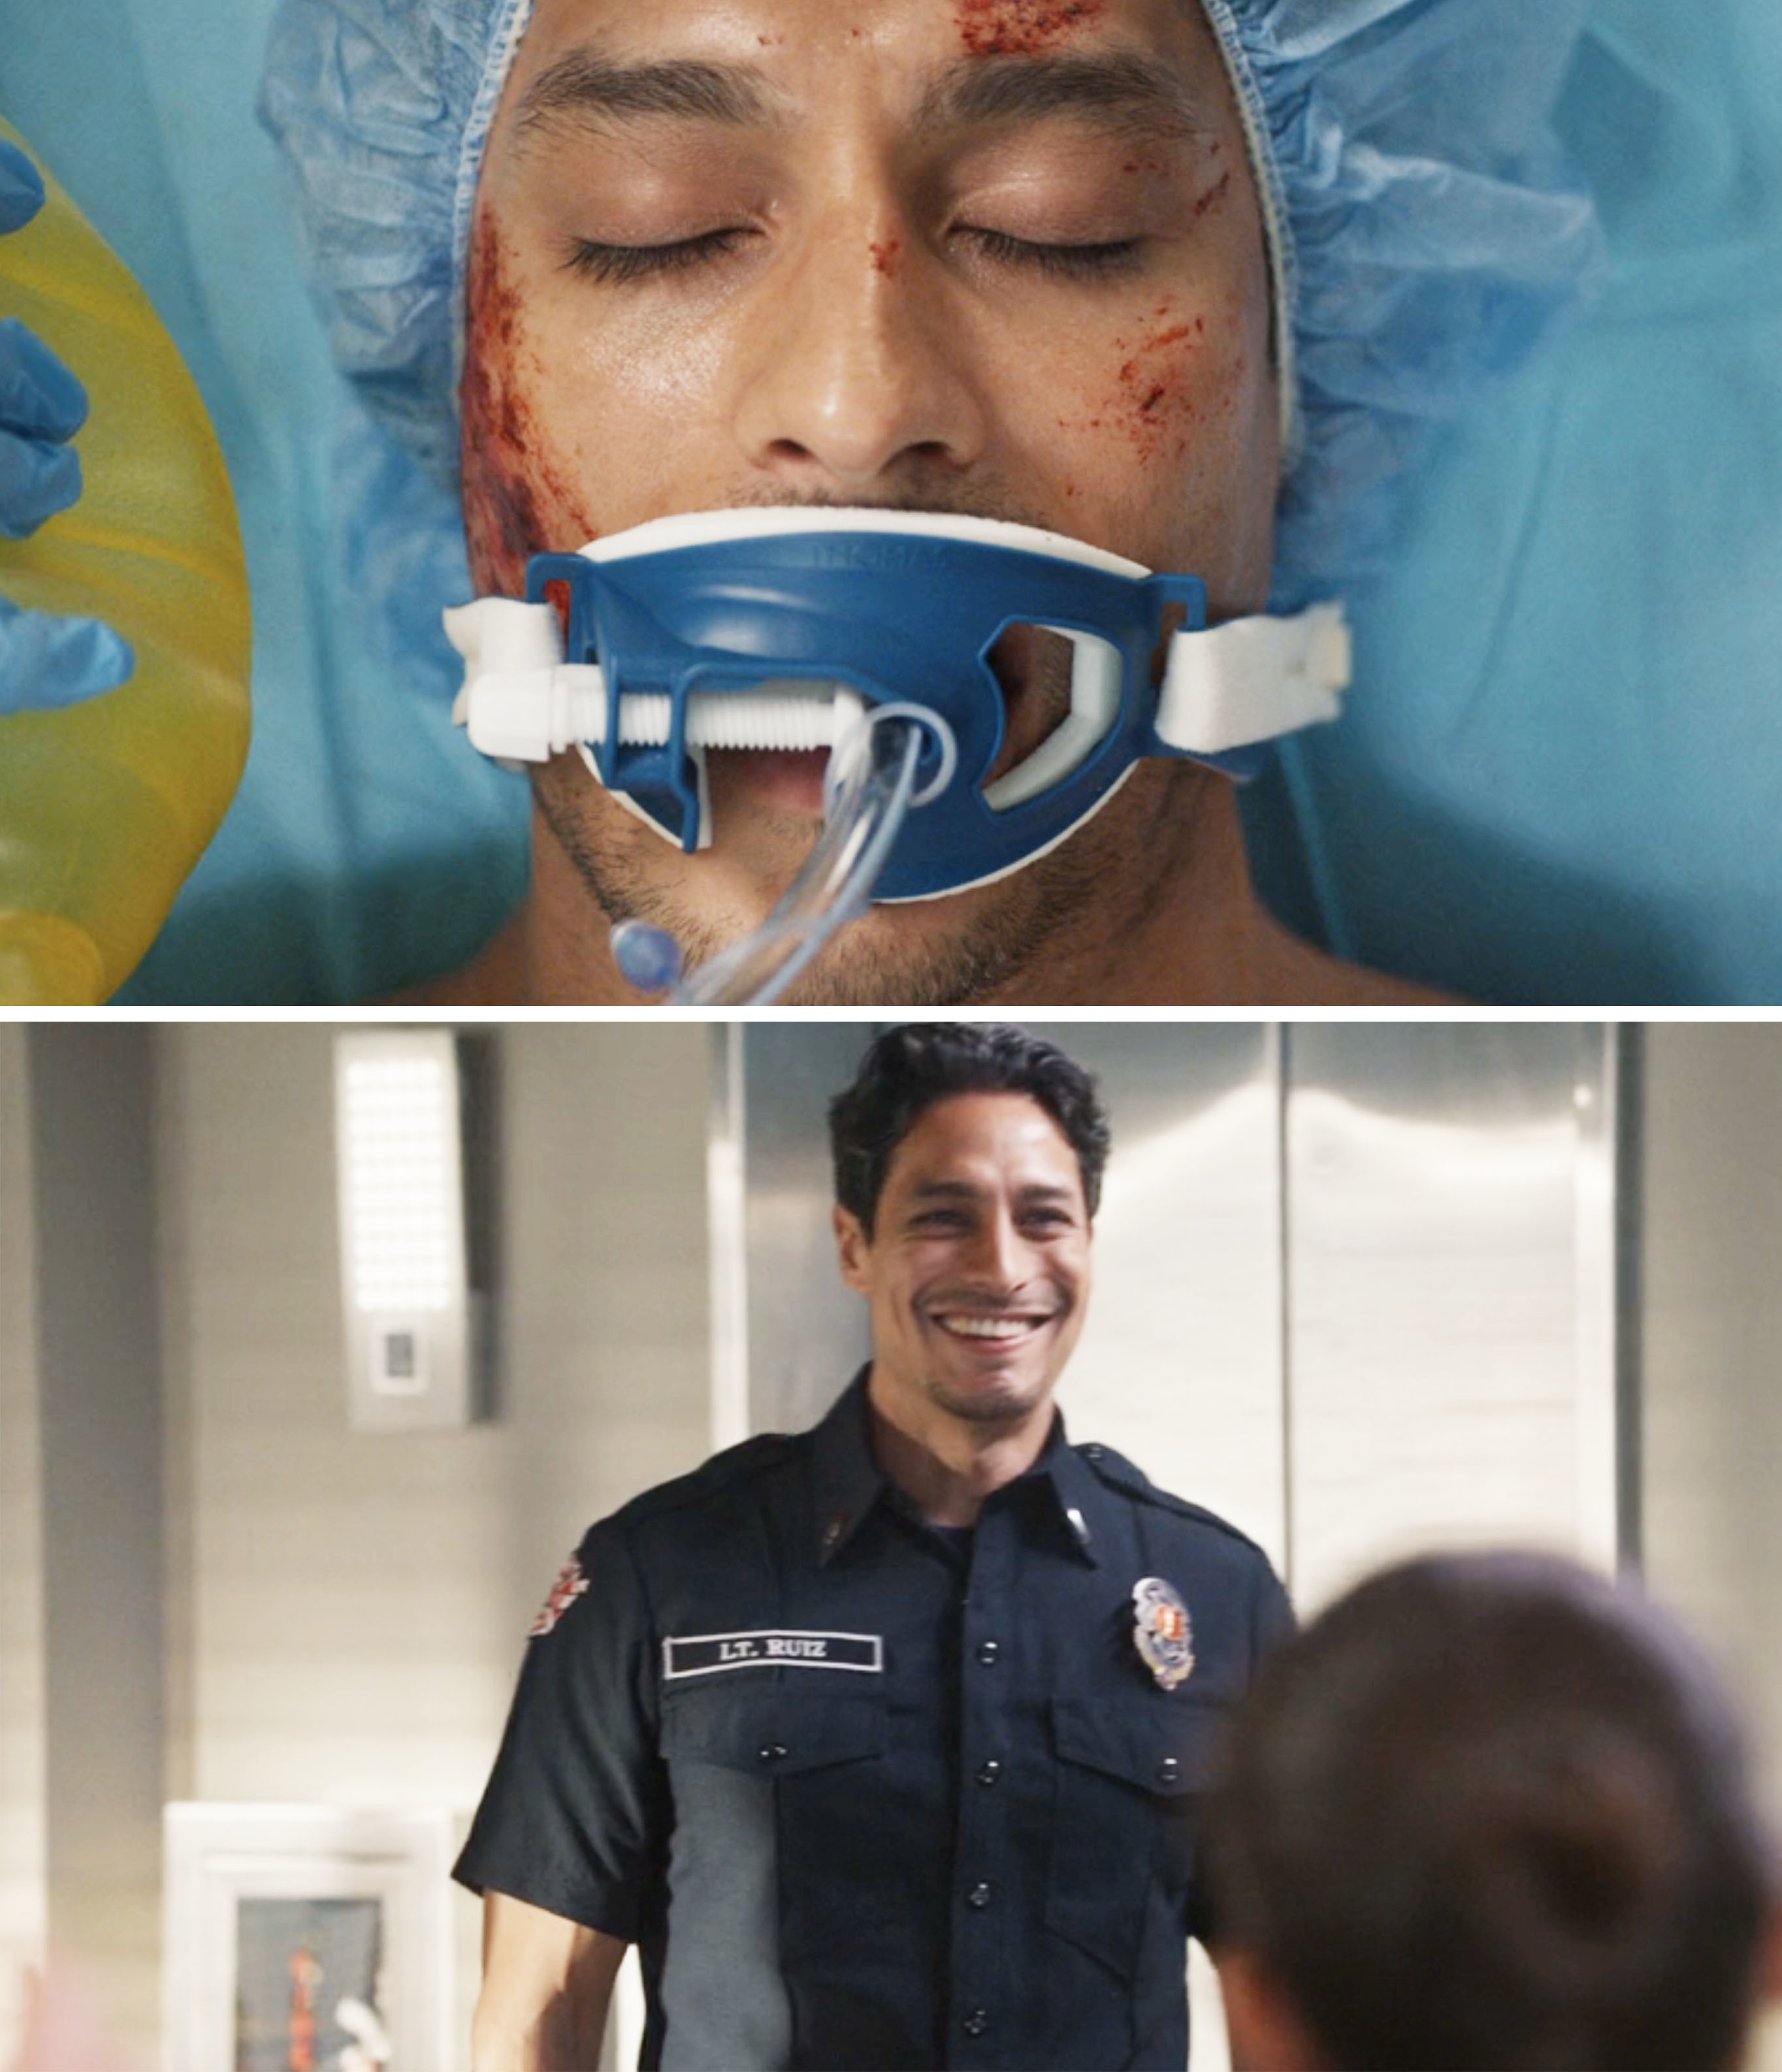 Two photos of Theo, one of him in the hospital vs him at Station 19 in his uniform